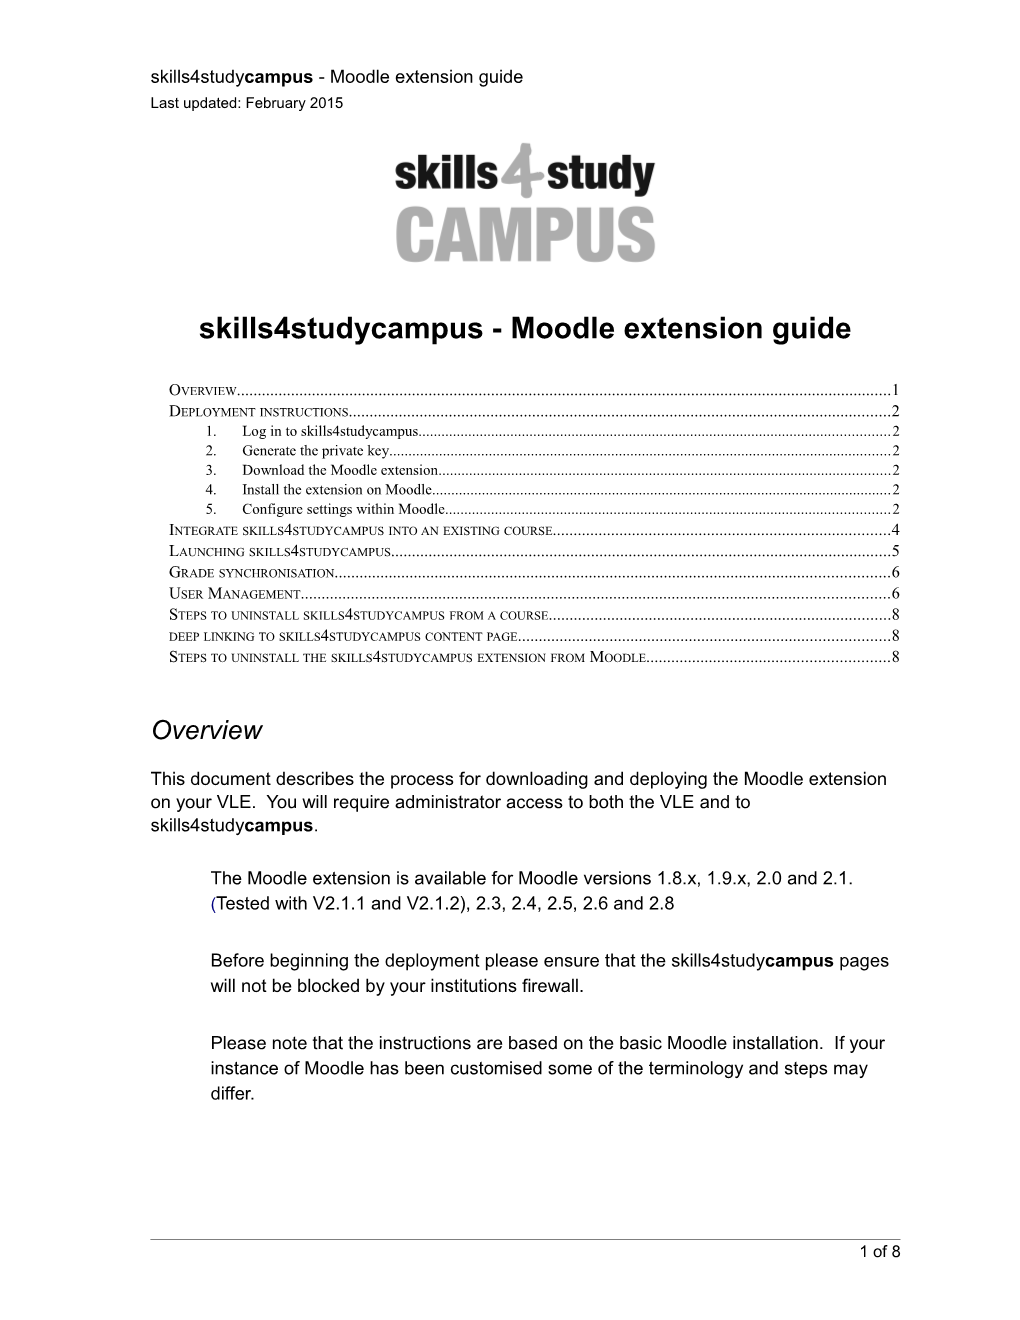 Skills4studycampus - Moodle Extension Guide